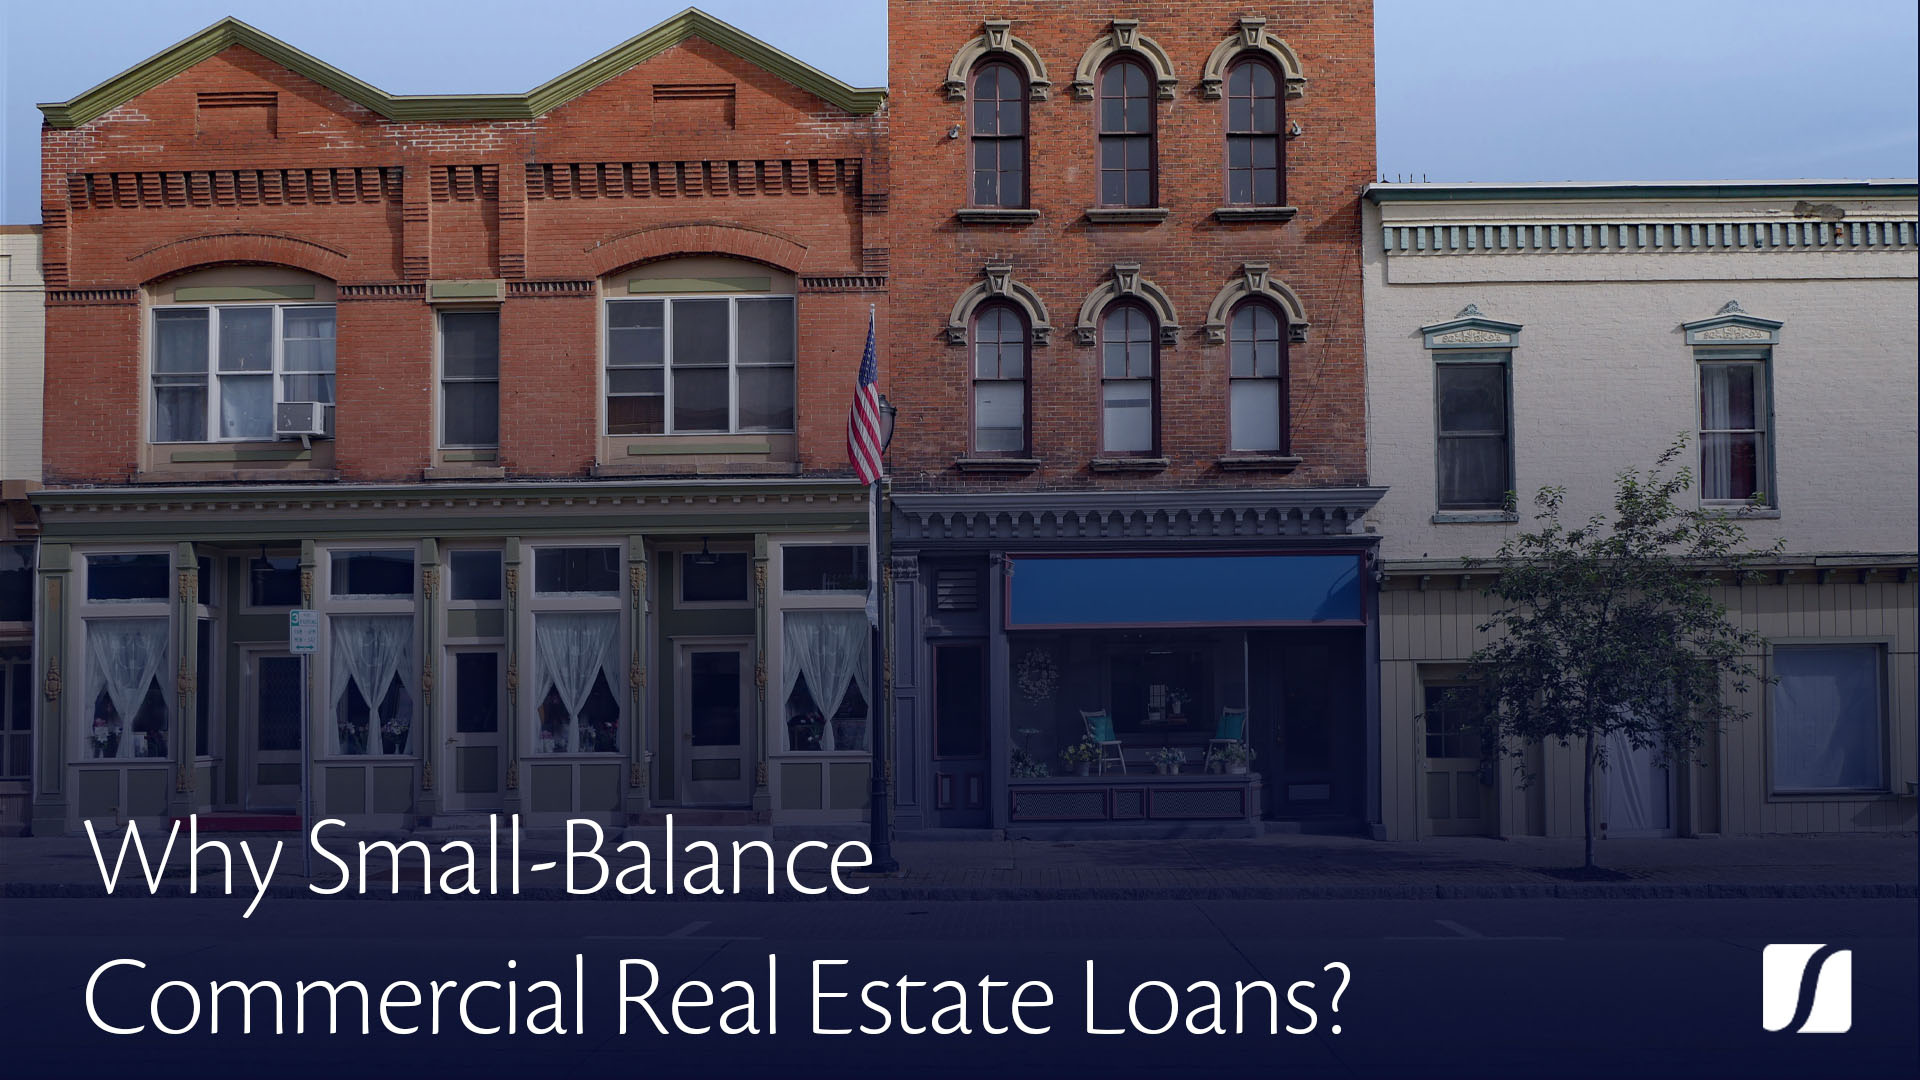 Why small balance commercial loans with Stronghill Capital